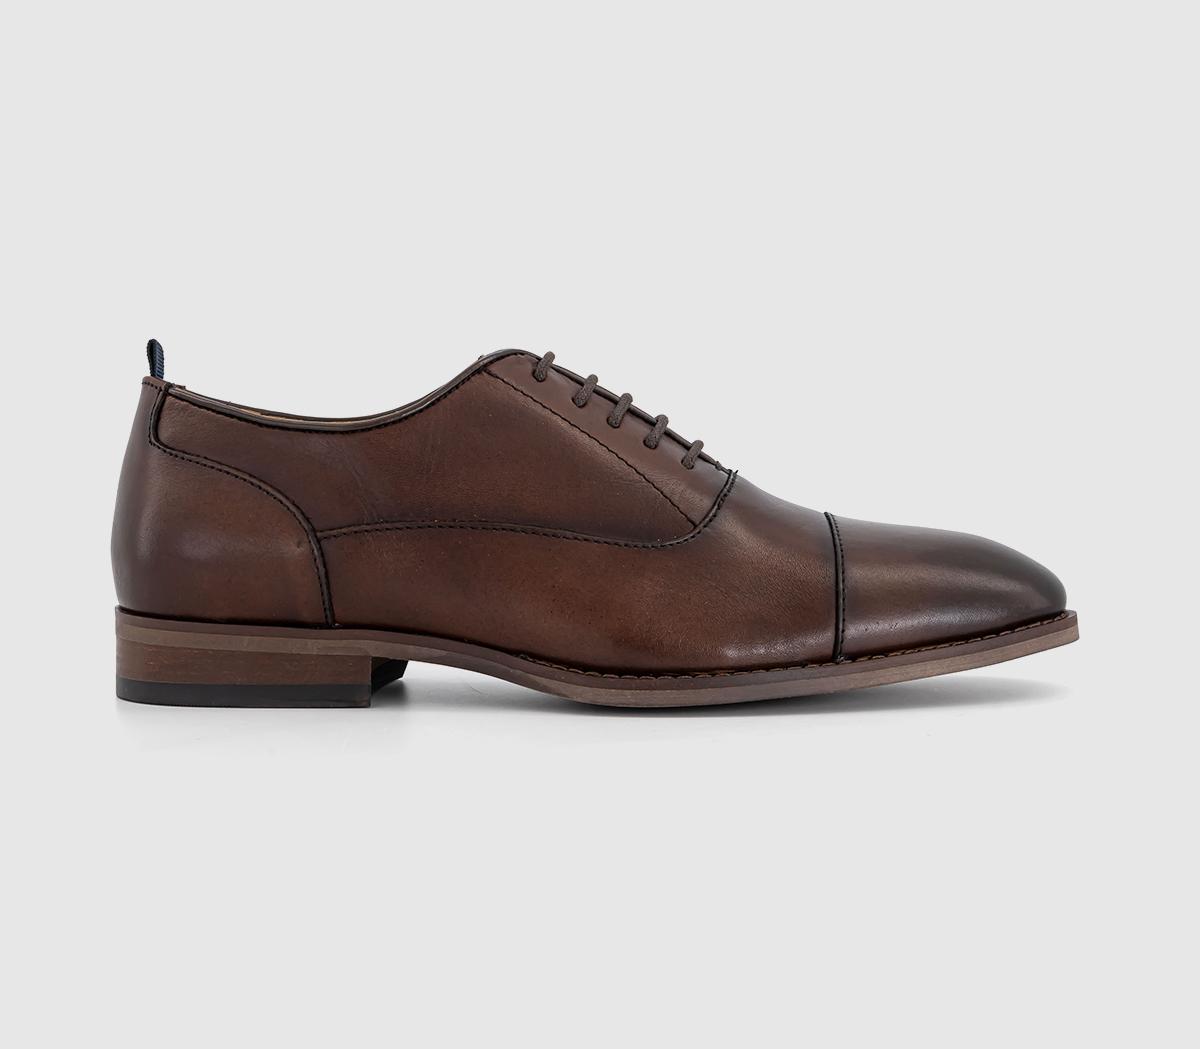 OFFICEMontana Toecap Oxford ShoesBrown Leather